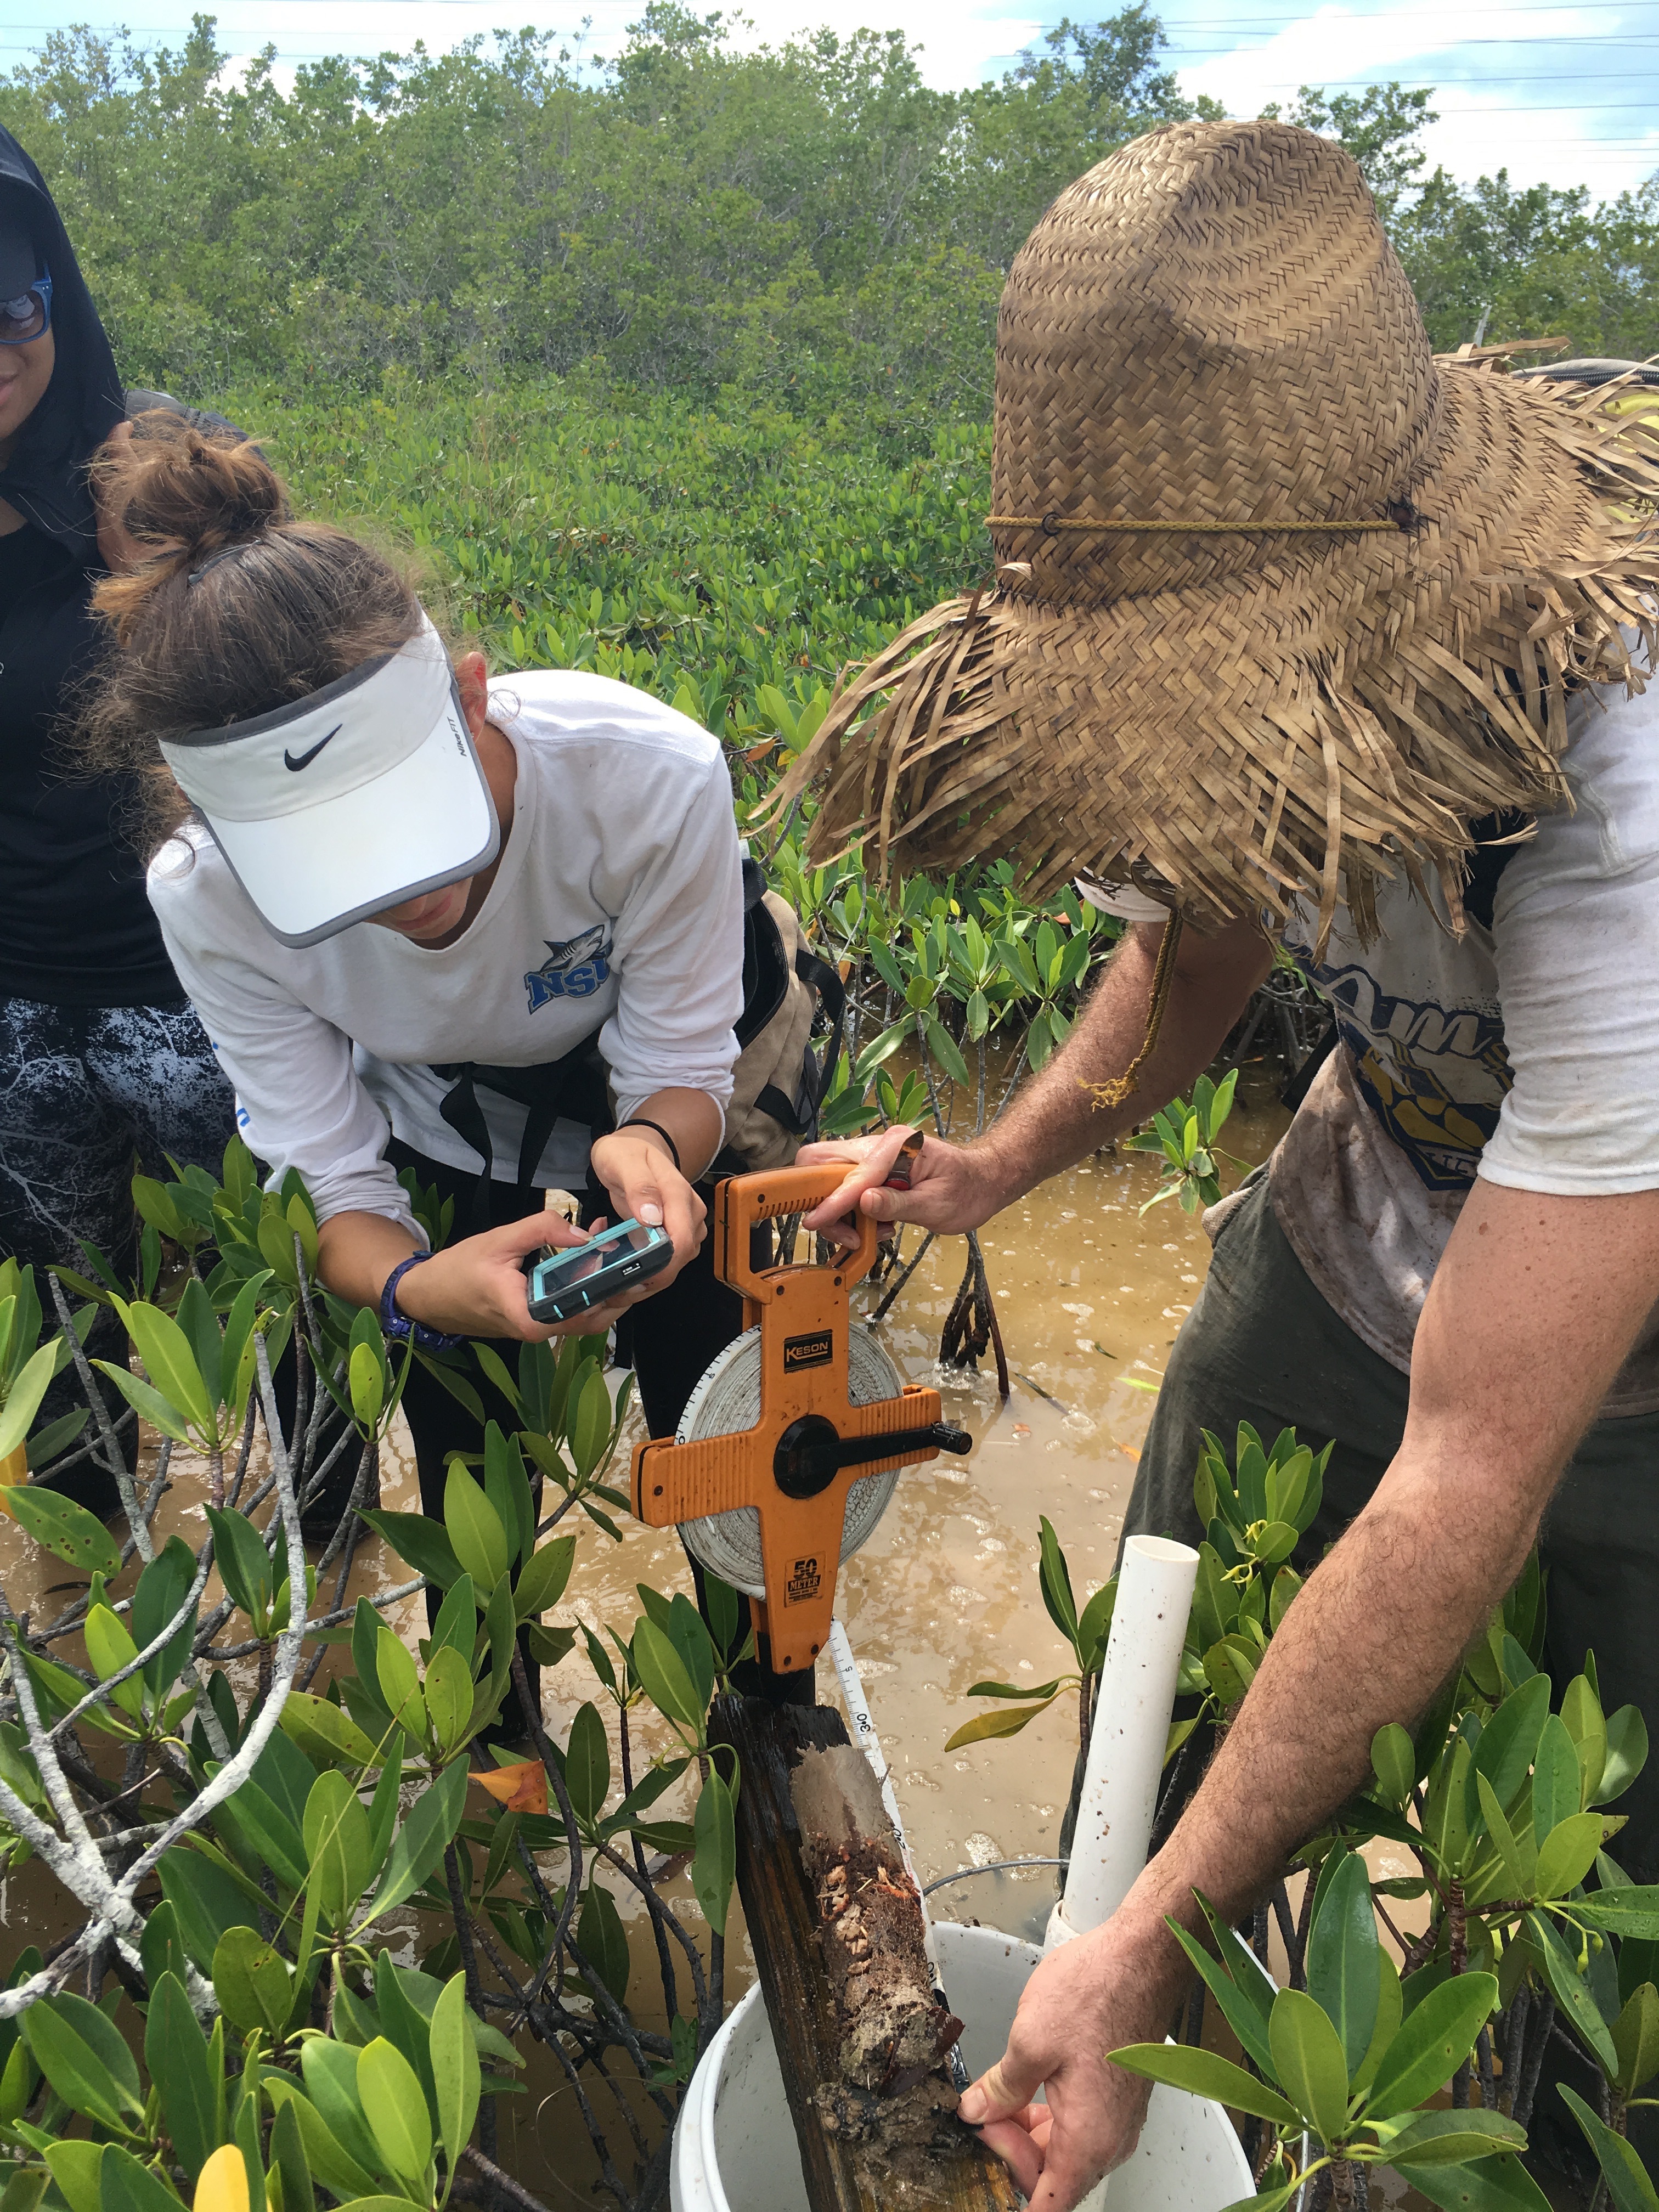 Venus Garcia (FIU QBIC Undergraduate, left) and Sean Charles (FIU Ph.D. student, right) measuring the length of a soil core in Biscayne National Park.